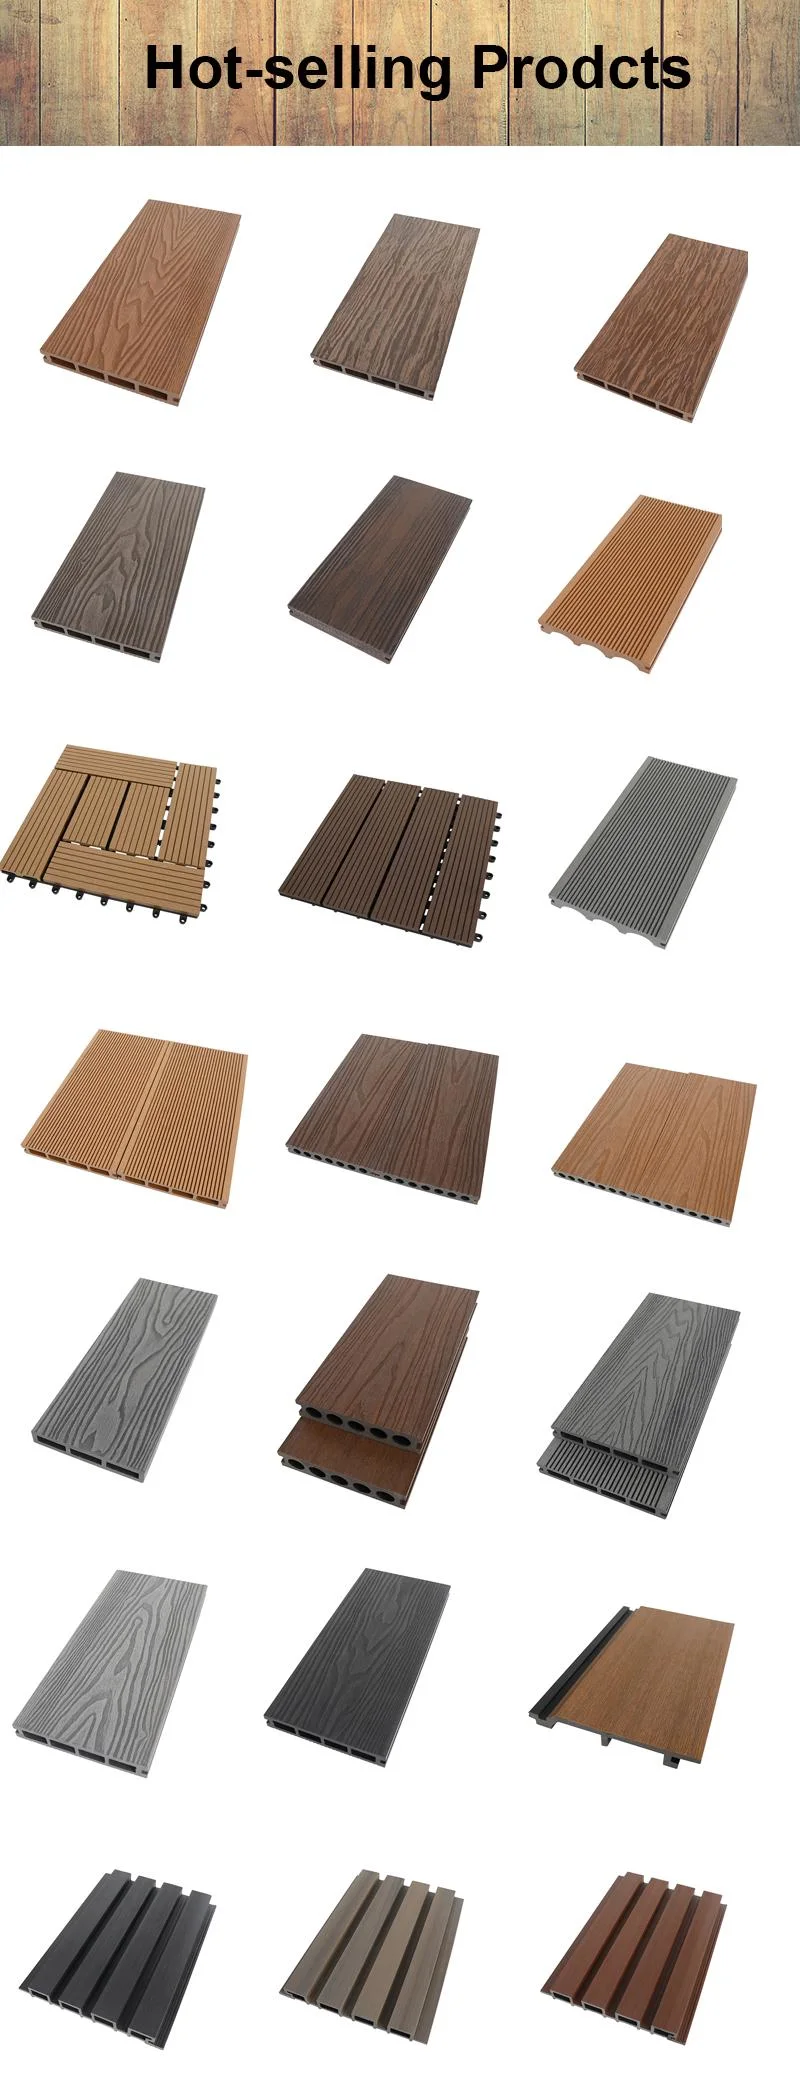 Anti-Termite Co-Extrusion Exterior Wood Plastic Composite Wall Cladding Panels for Decoration